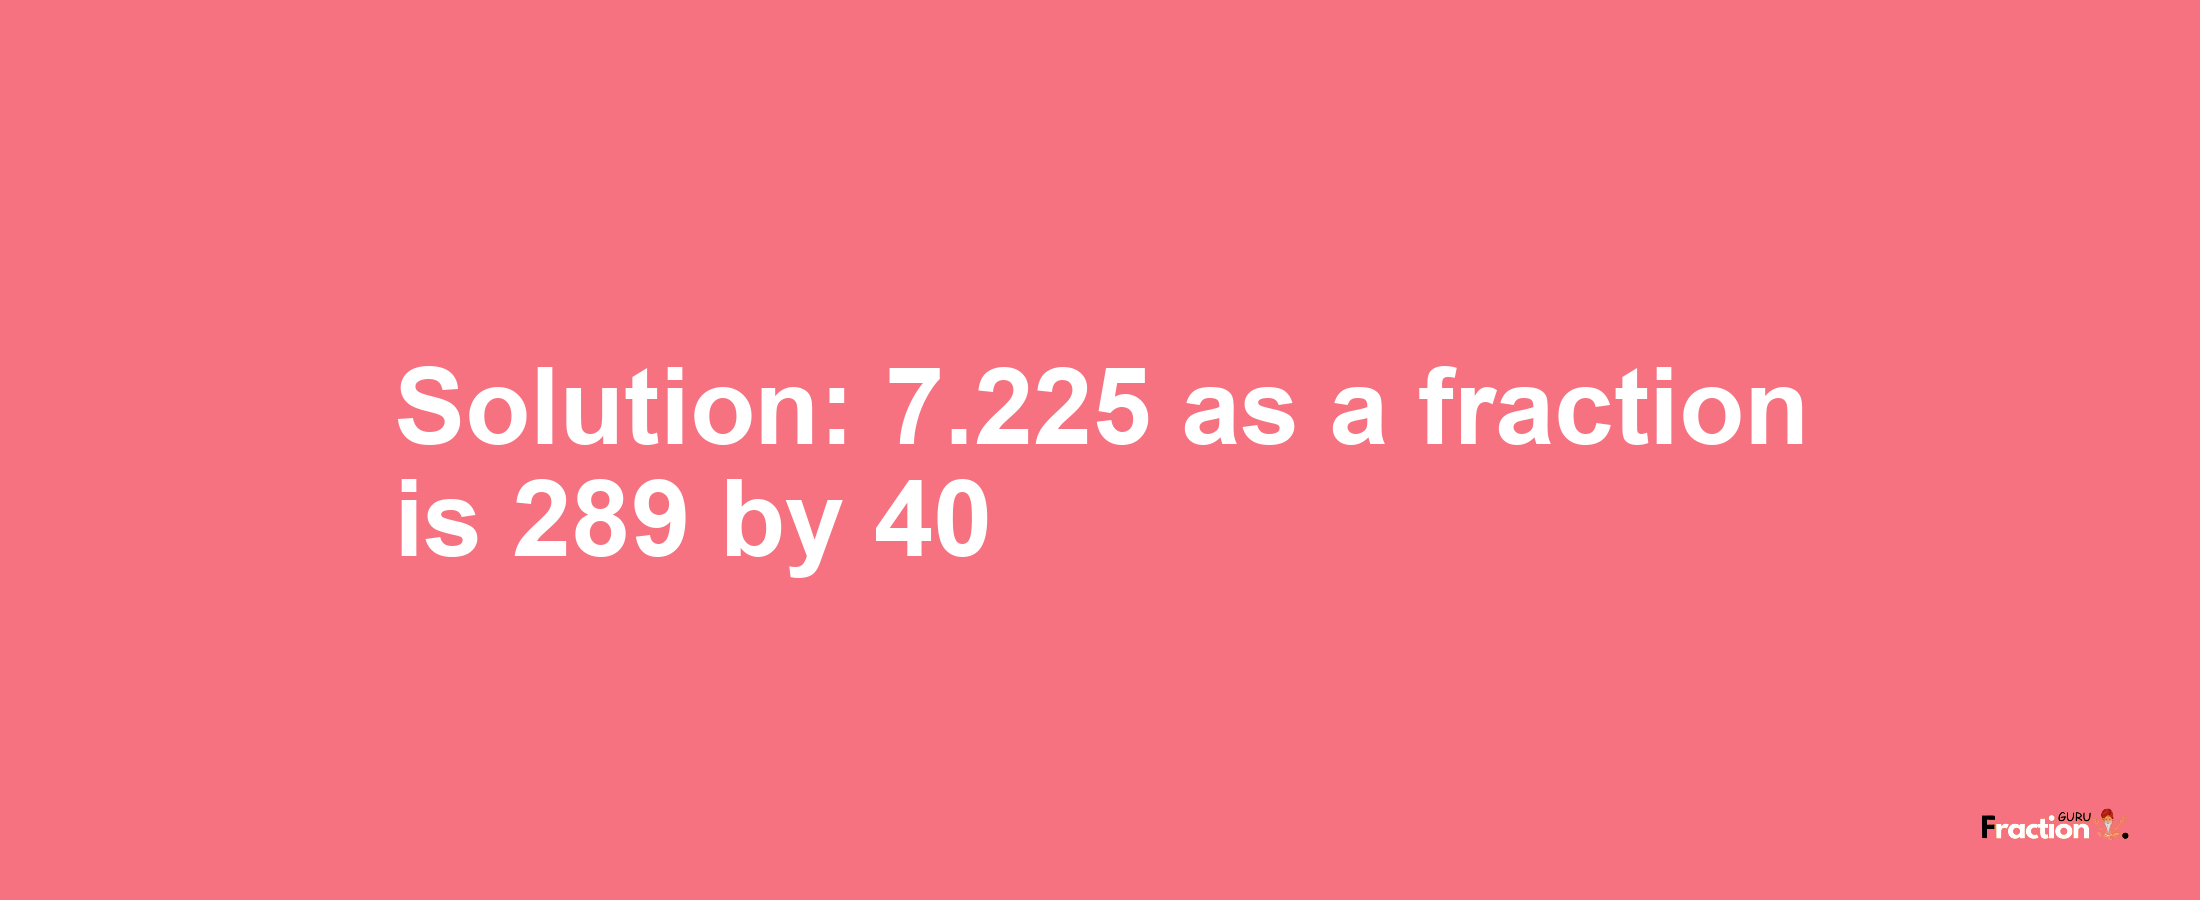 Solution:7.225 as a fraction is 289/40